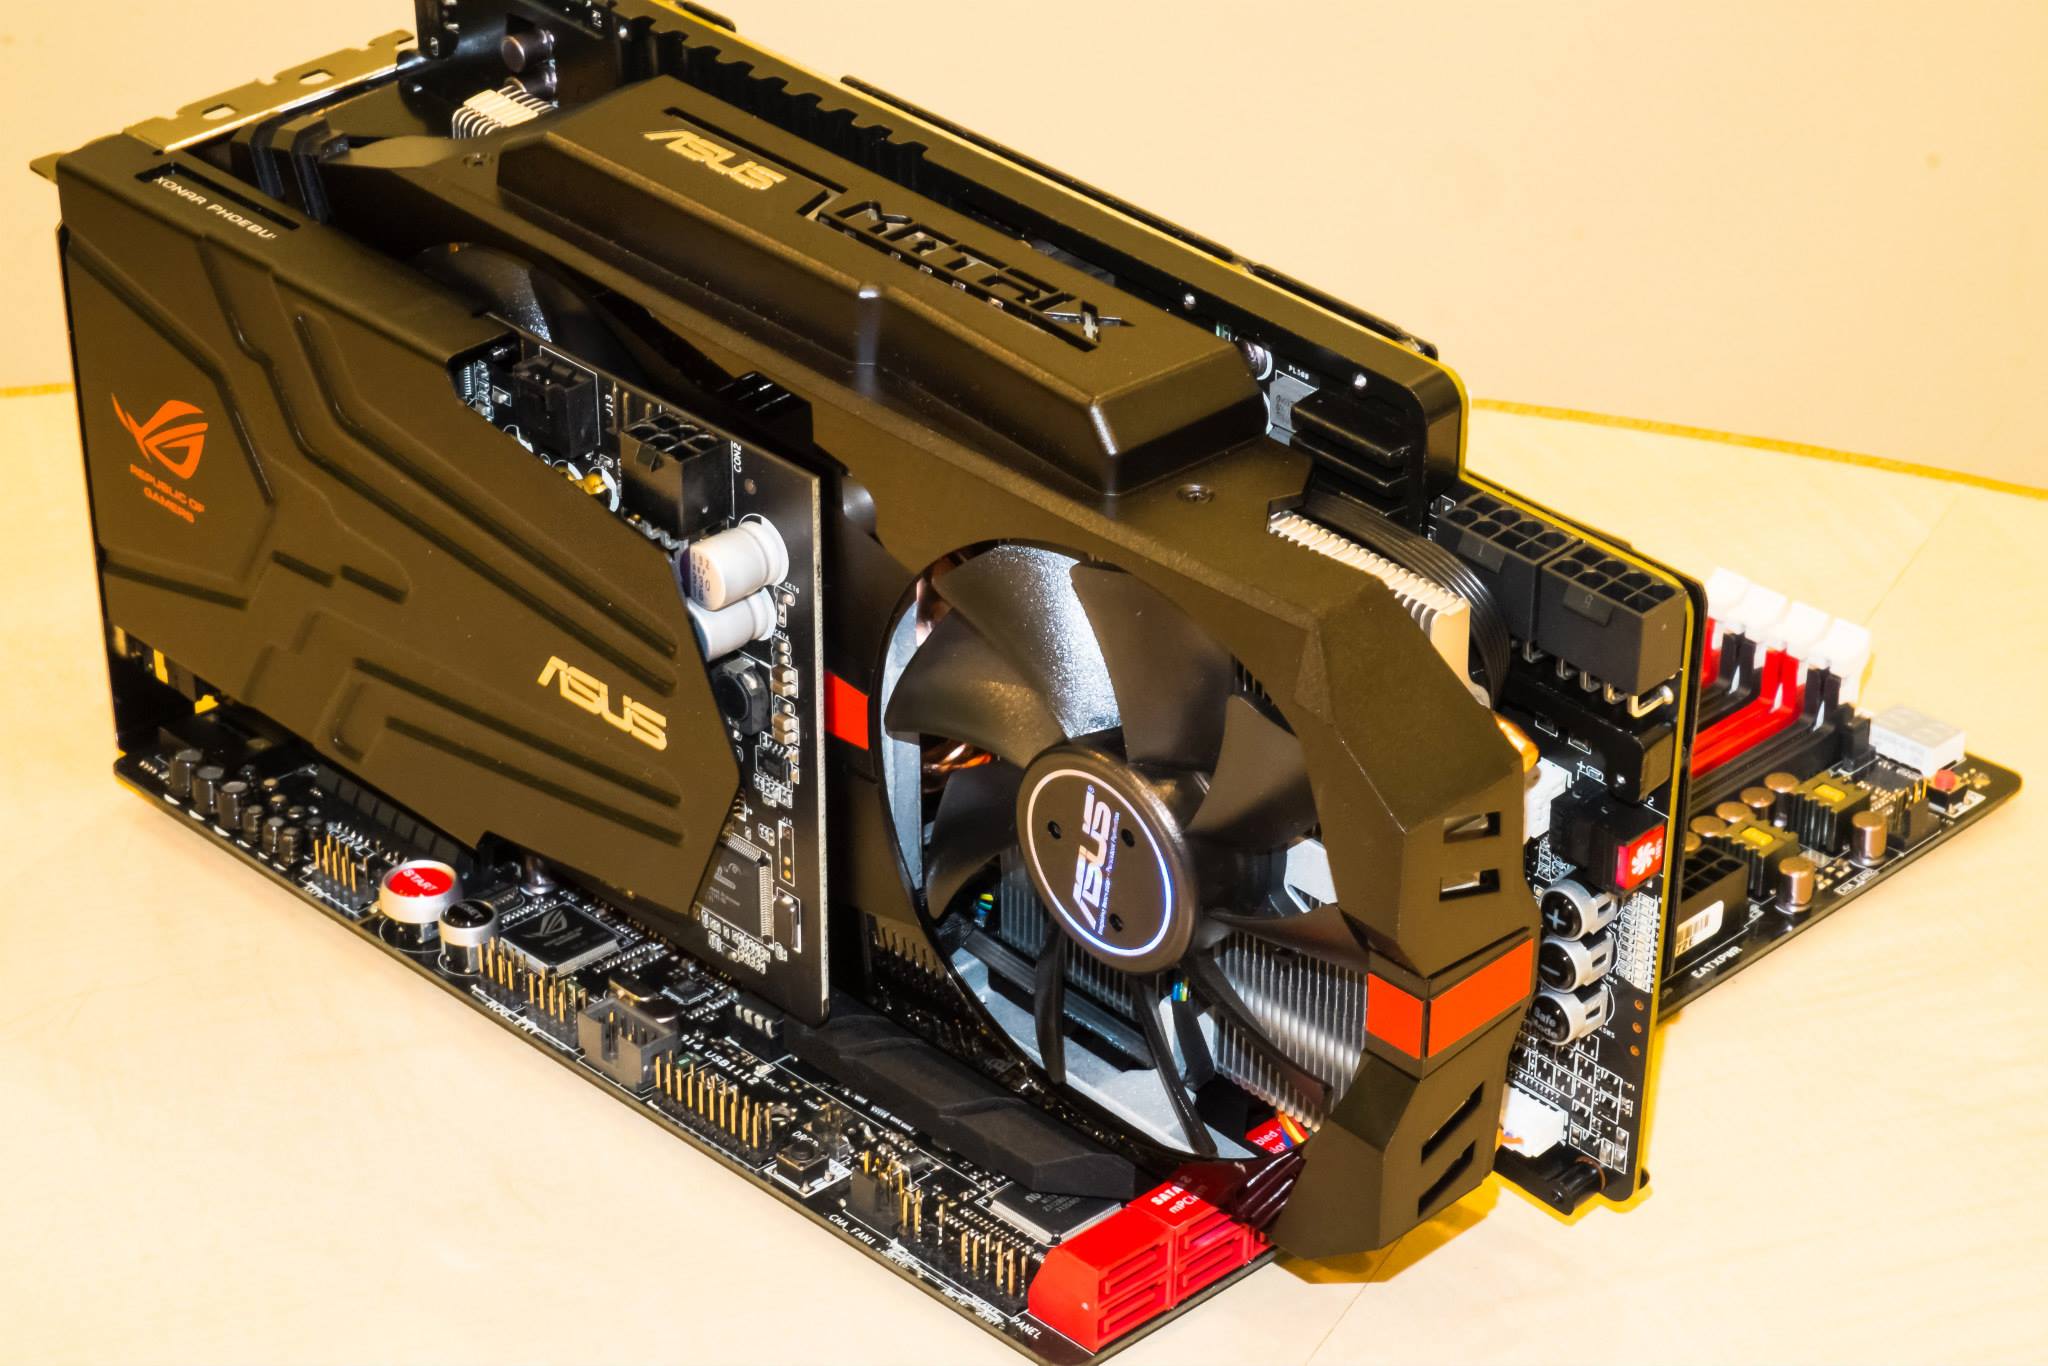 Media asset (photo, screenshot, or image in full size) related to contents posted at 3dfxzone.it | Image Name: news20183-ASUS-ROG-Matrix-R9-280X-Platinum_7.jpg